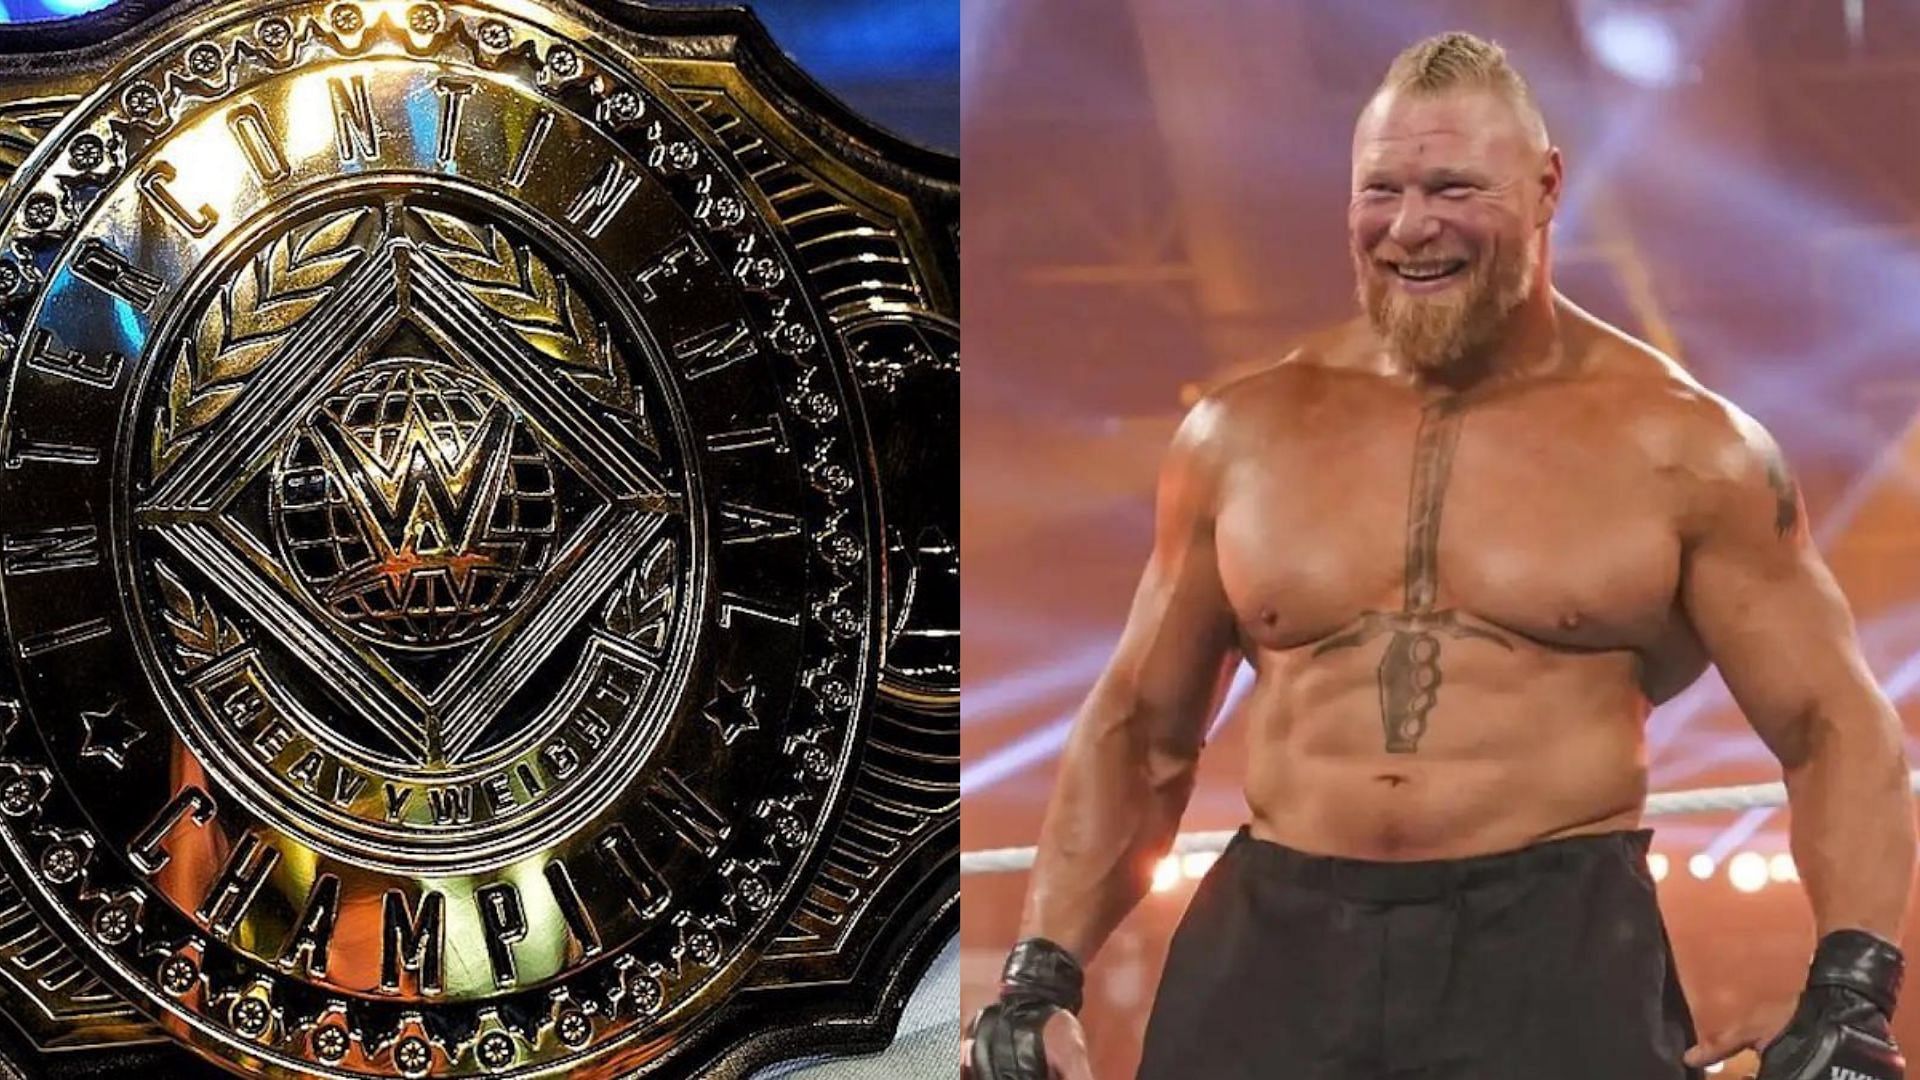 Find out which former Intercontinental Champion could return at SummerSlam?